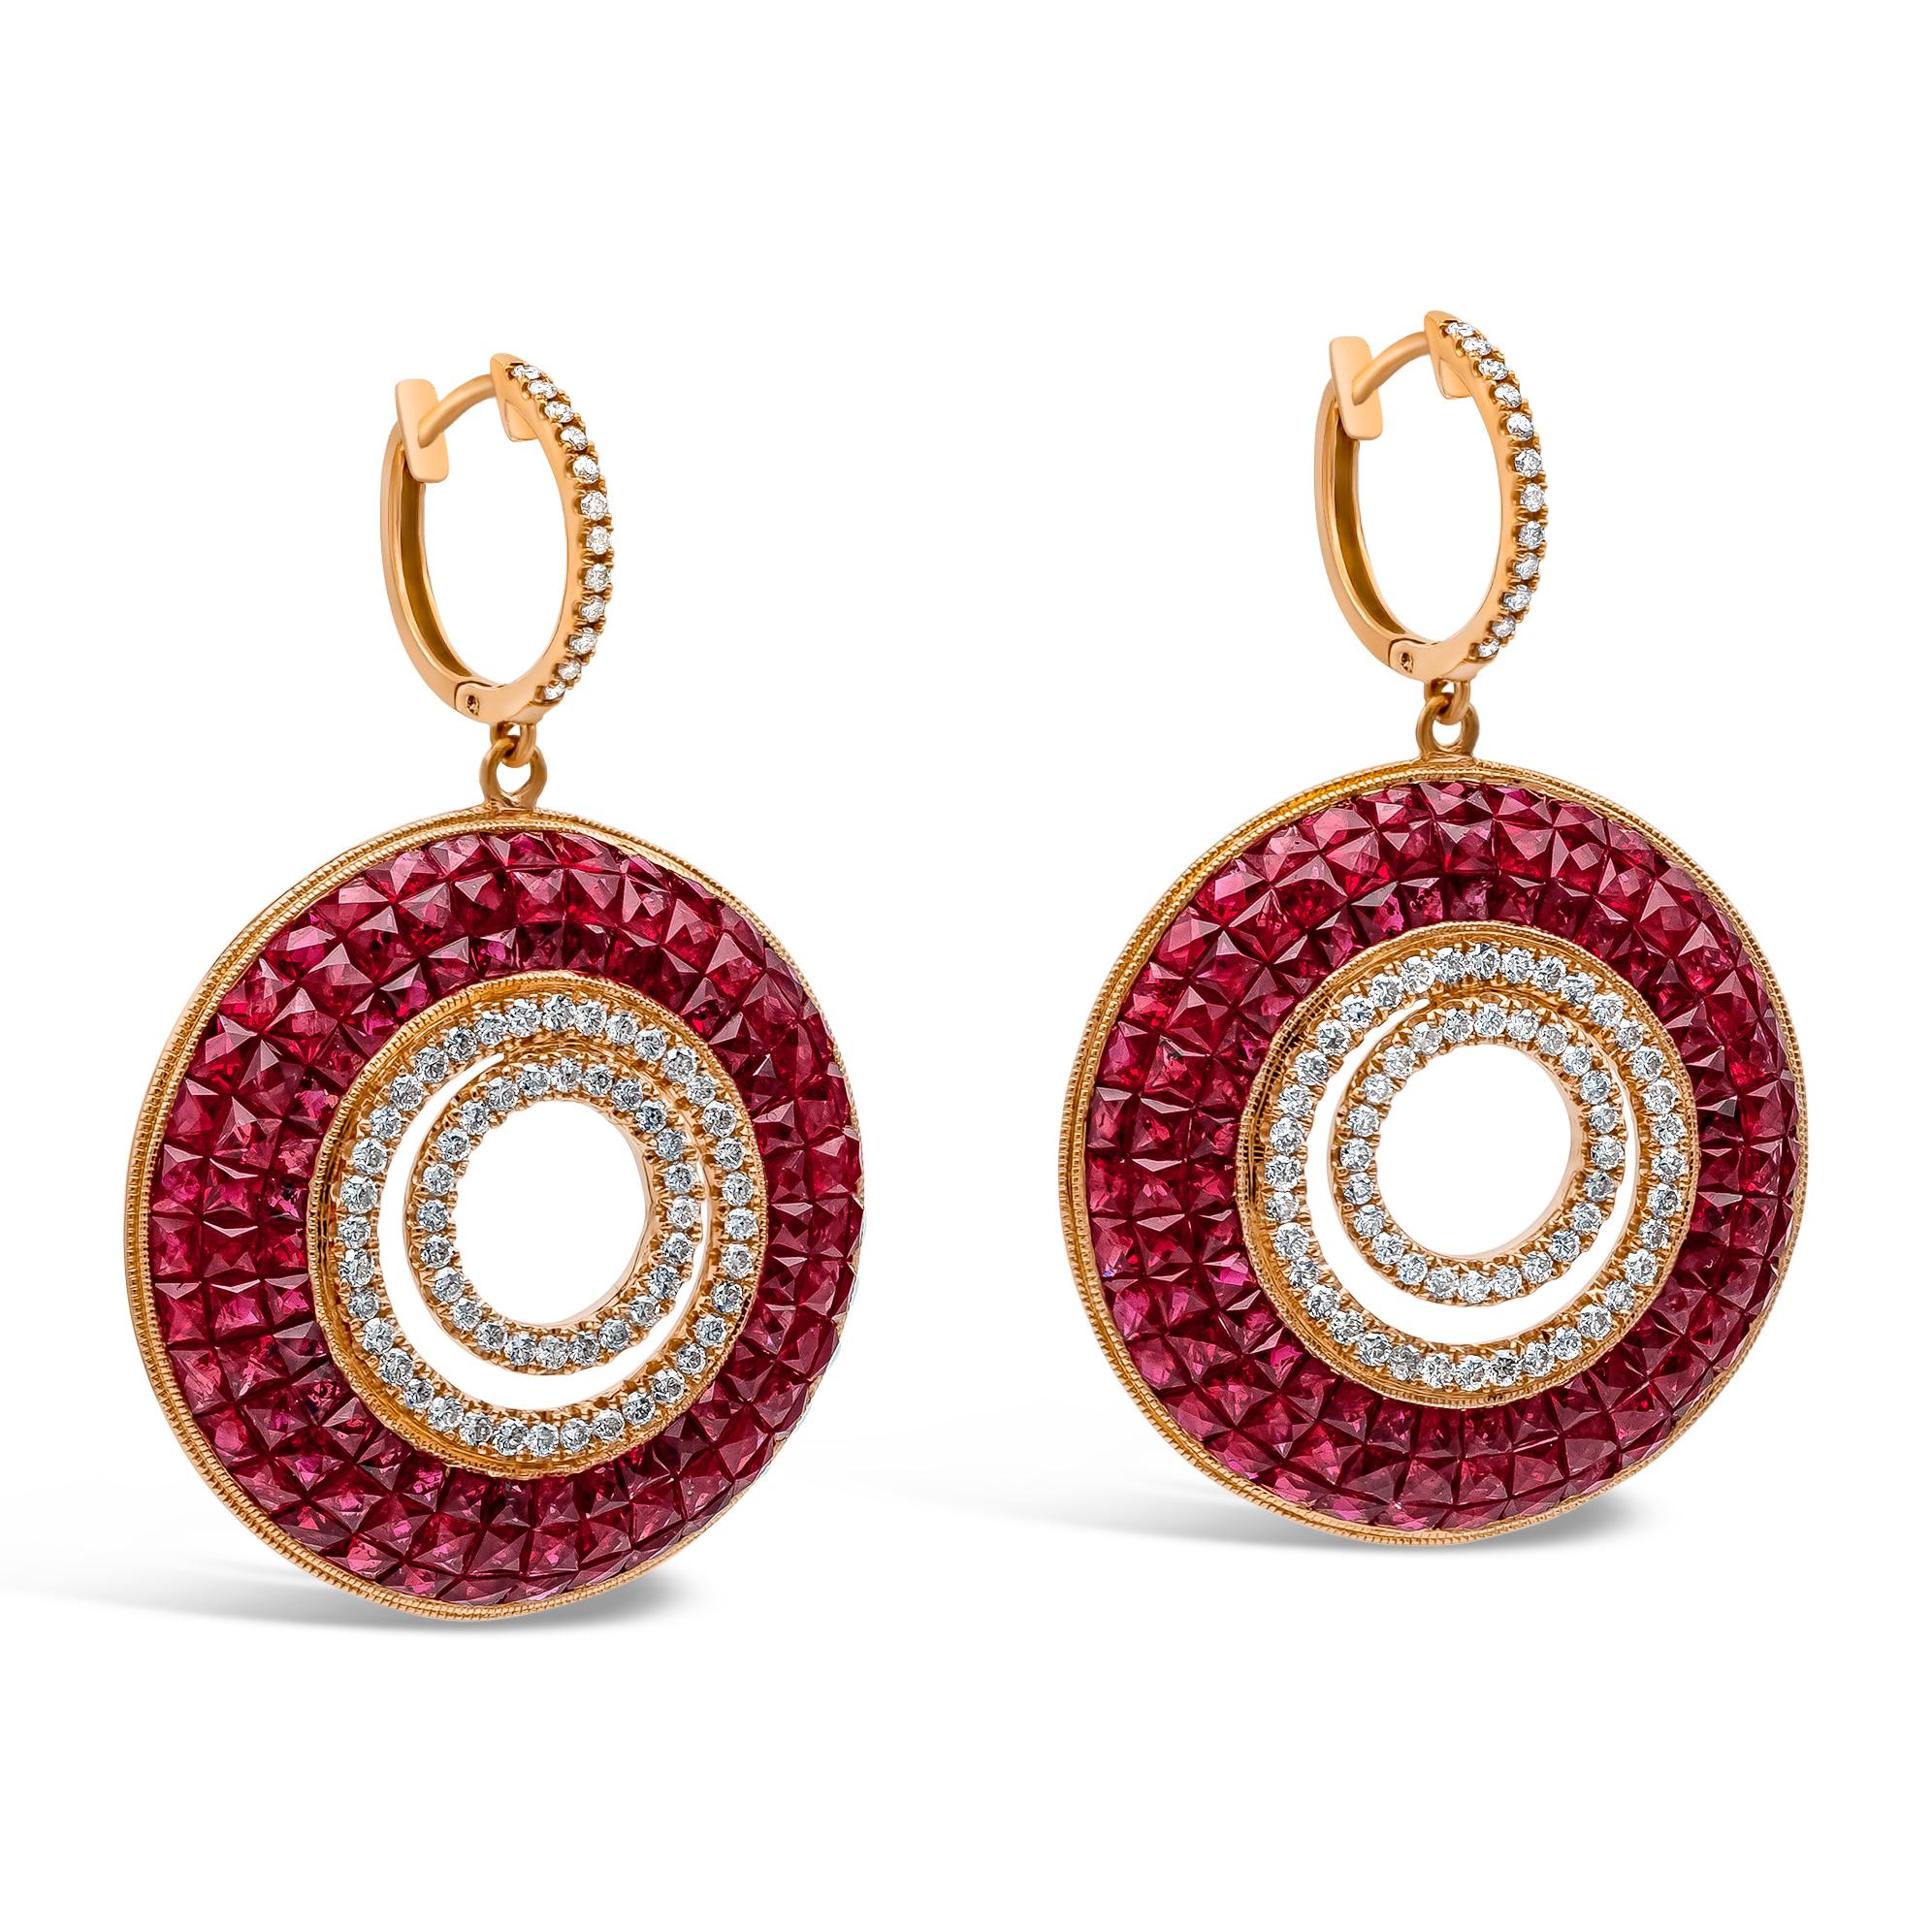 A beautiful and intricately-designed pair of dangle earrings showcasing a cluster of perfectly-matched rubies, invisibly set in an 18k rose gold mounting. The earrings are accented with round brilliant diamonds and is suspended on a rose gold hoop.